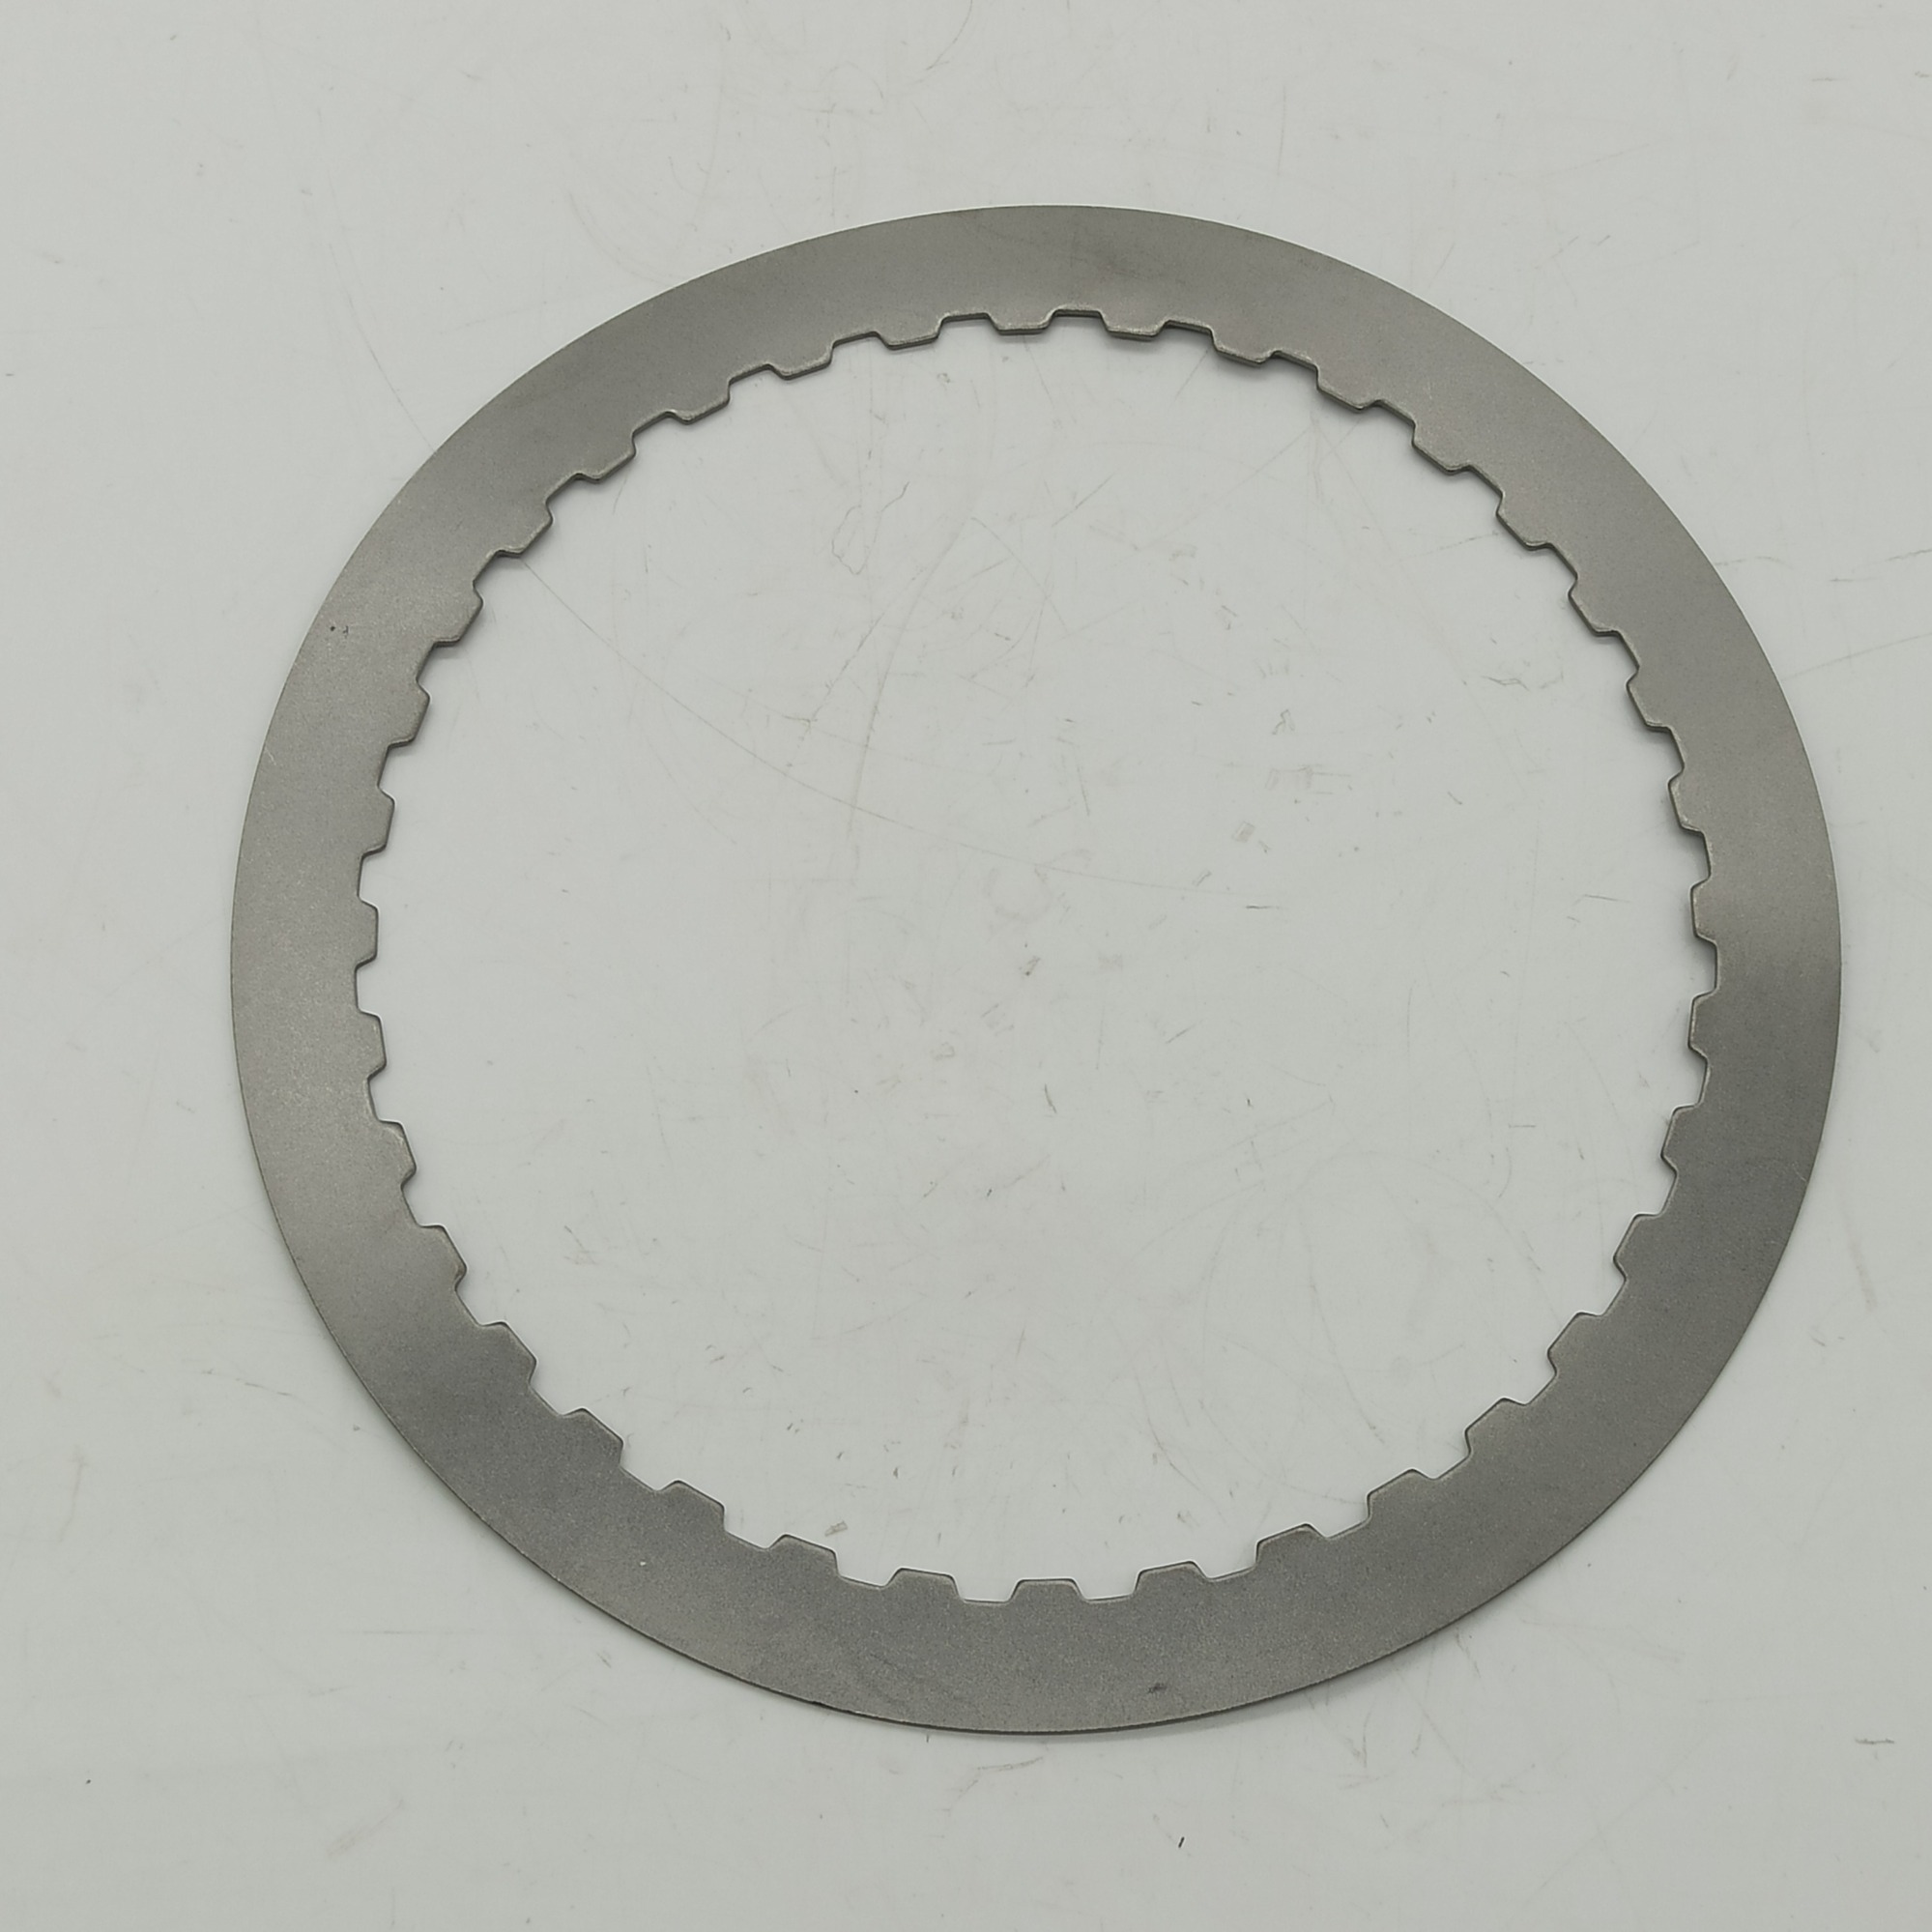 6T70-0001-OEM 6T70 3-5 /Reverse AT Clutch Wave Plate ACDelco GM Original Equipment 24254103